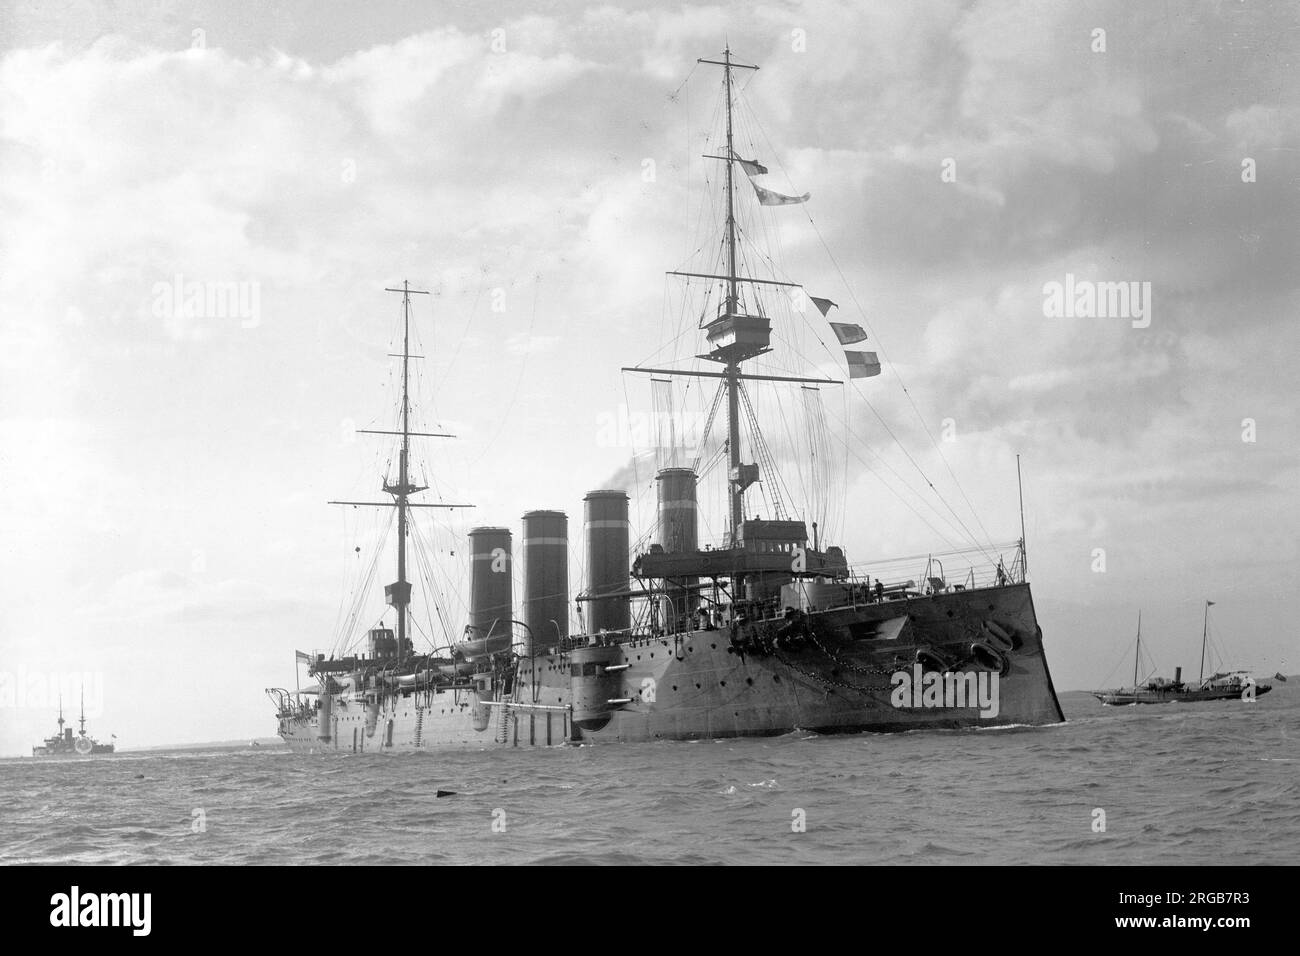 Royal Navy - HMS Leviathan, a Drake-class armoured cruiser. HMS Leviathan was one of four Drake-class armoured cruisers built for the Royal Navy around 1900. She was assigned to the China Station upon completion and then served in the Mediterranean Fleet in 1905-06. She was assigned to the 7th Cruiser Squadron in 1907 before she was briefly reduced to reserve. Leviathan was recommissioned in 1909 for service with the 4th Cruiser Squadron before she was placed in reserve in 1913. Recommissioned in mid-1914, she was assigned to the 6th Cruiser Squadron of the Grand Fleet at the beginning of Worl Stock Photo